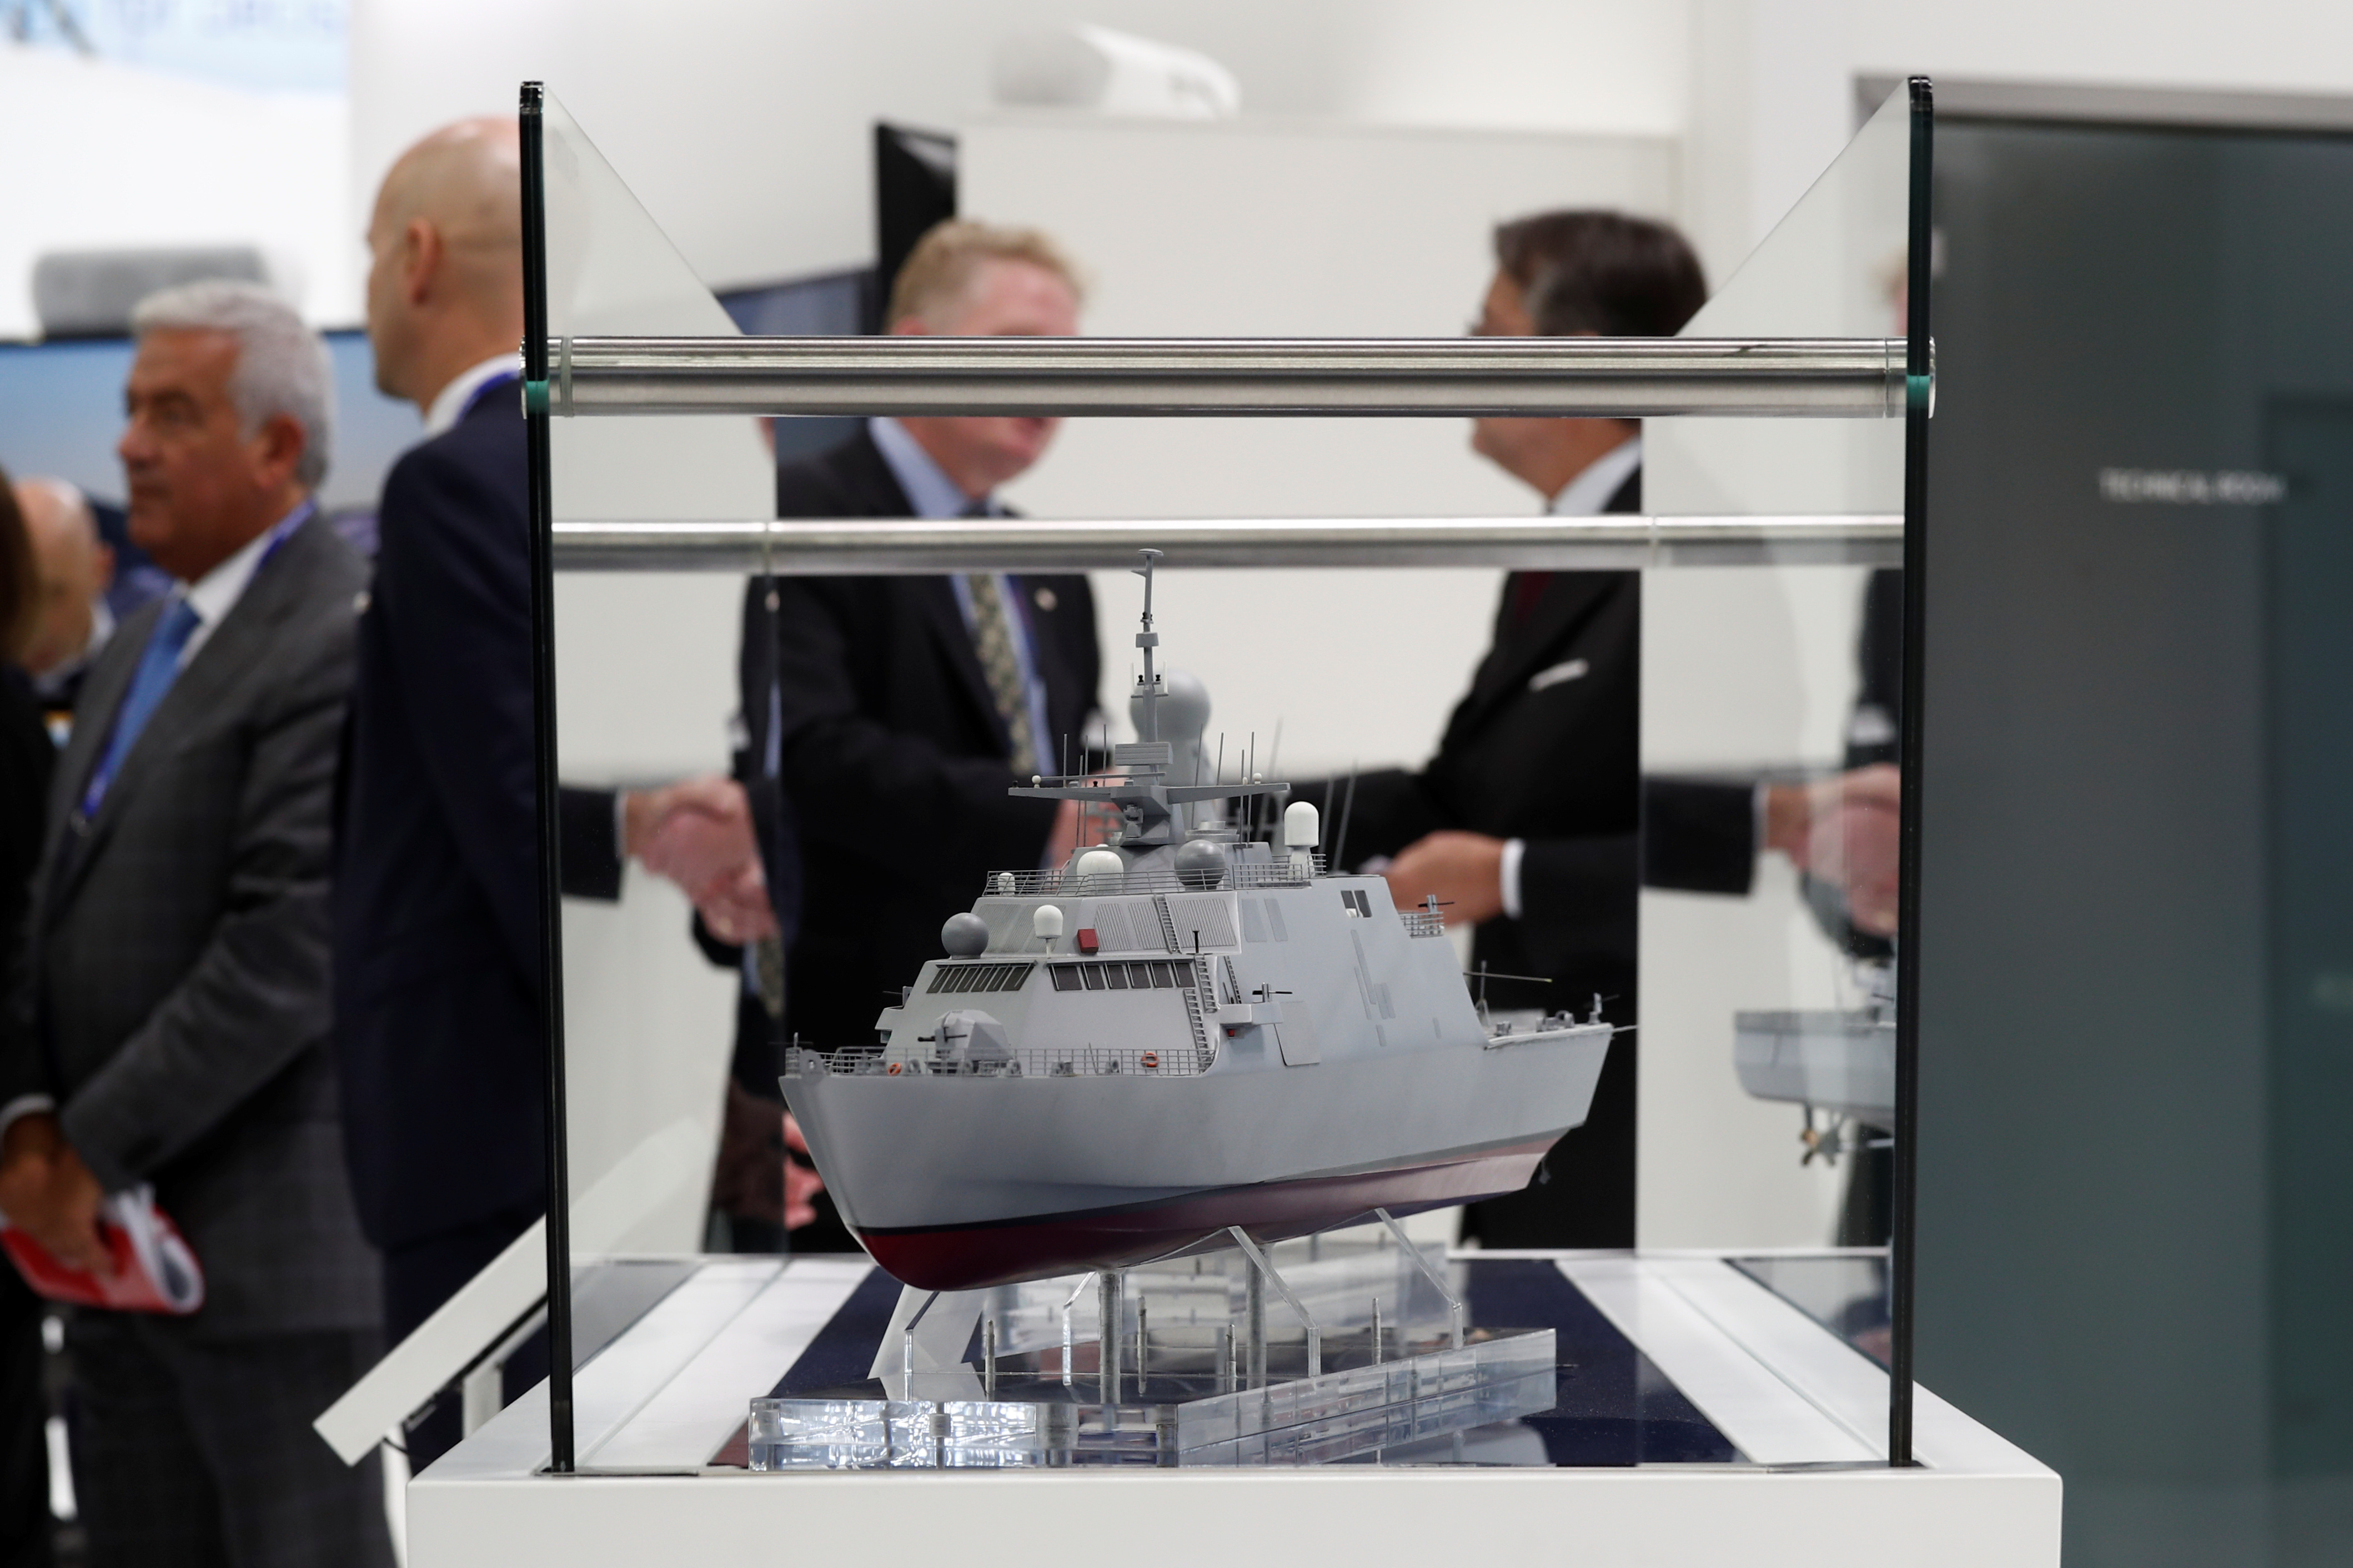 A sub-scale sized model of a Corvette by Fincantieri is displayed at Euronaval, the world naval defence exhibition in Le Bourget near Paris